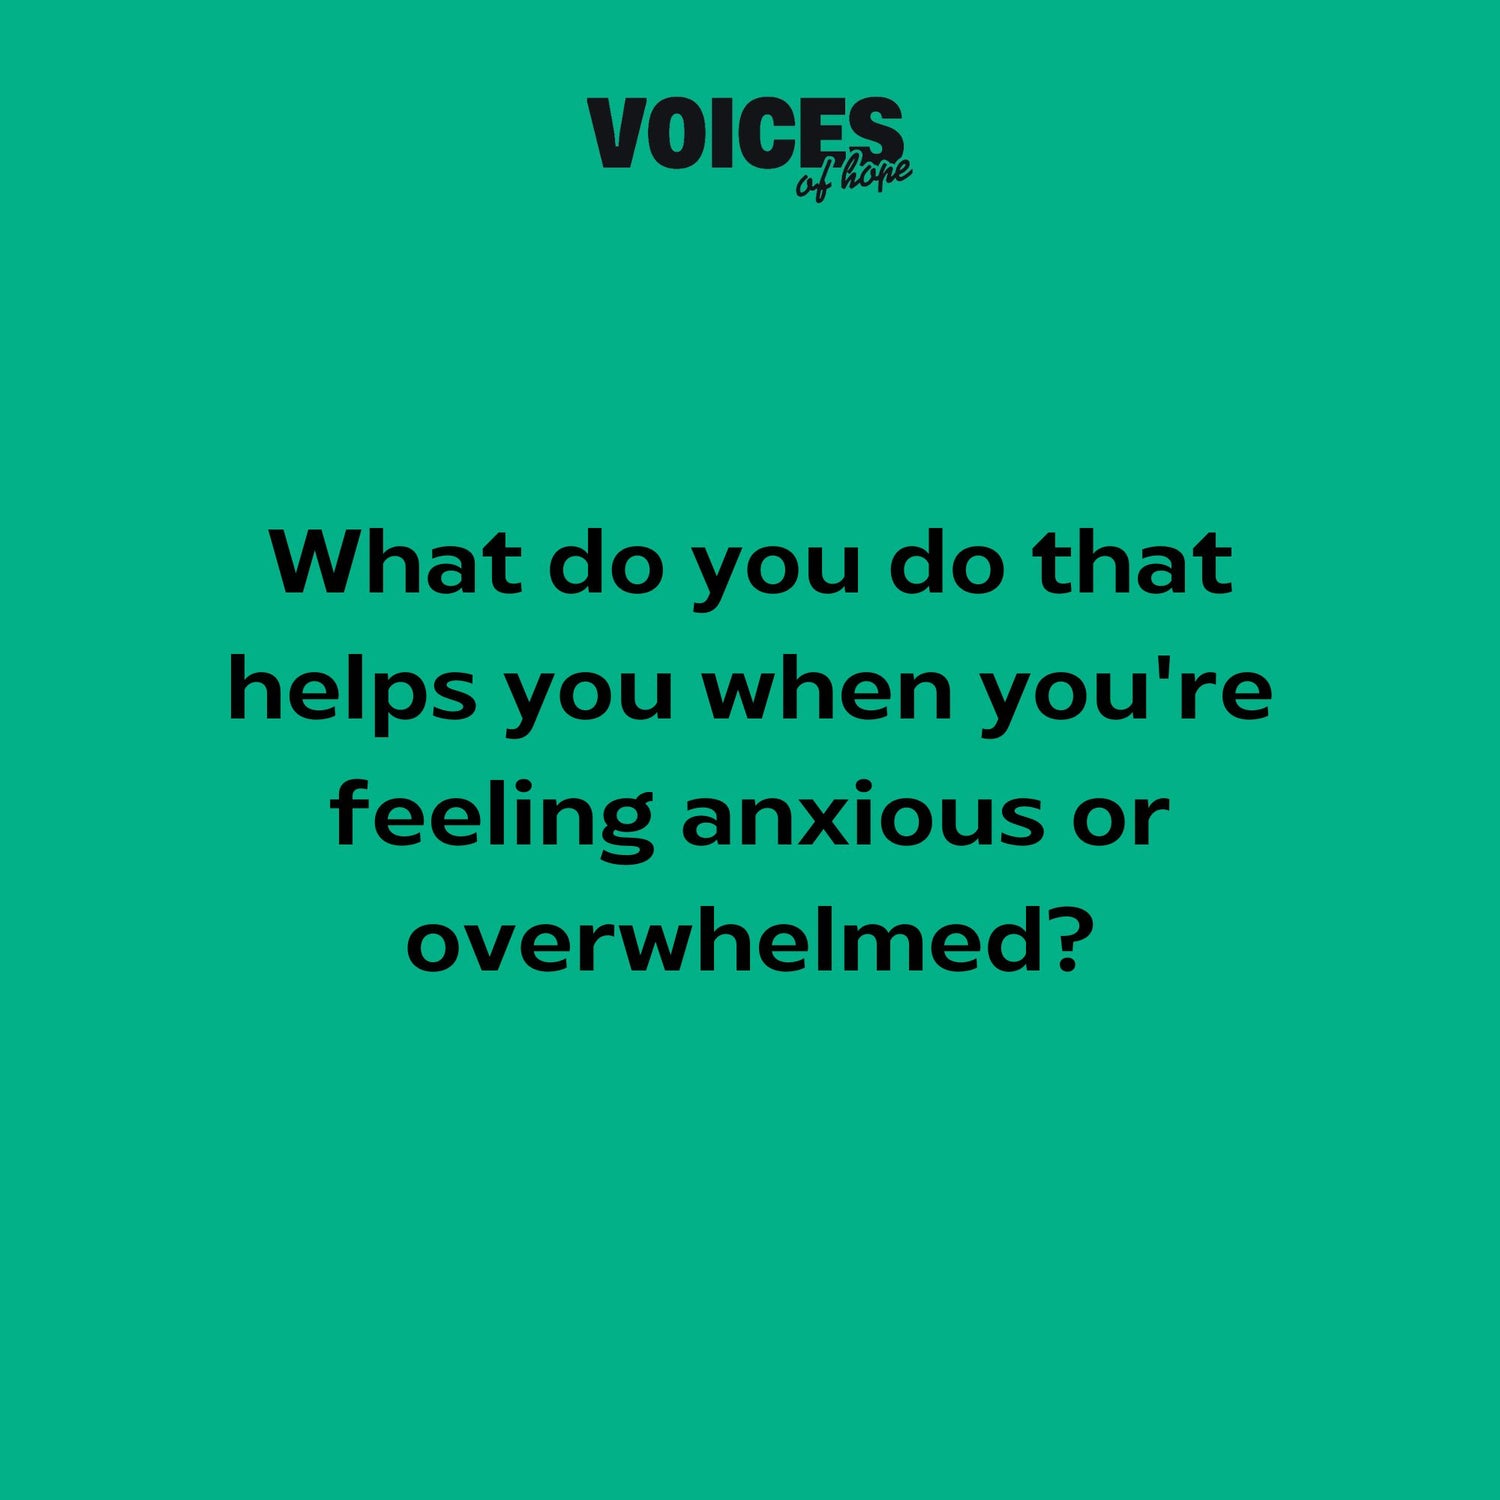 Green background with black writing that reads: "what do you do that helps when you're feeling anxious or overwhelmed?"